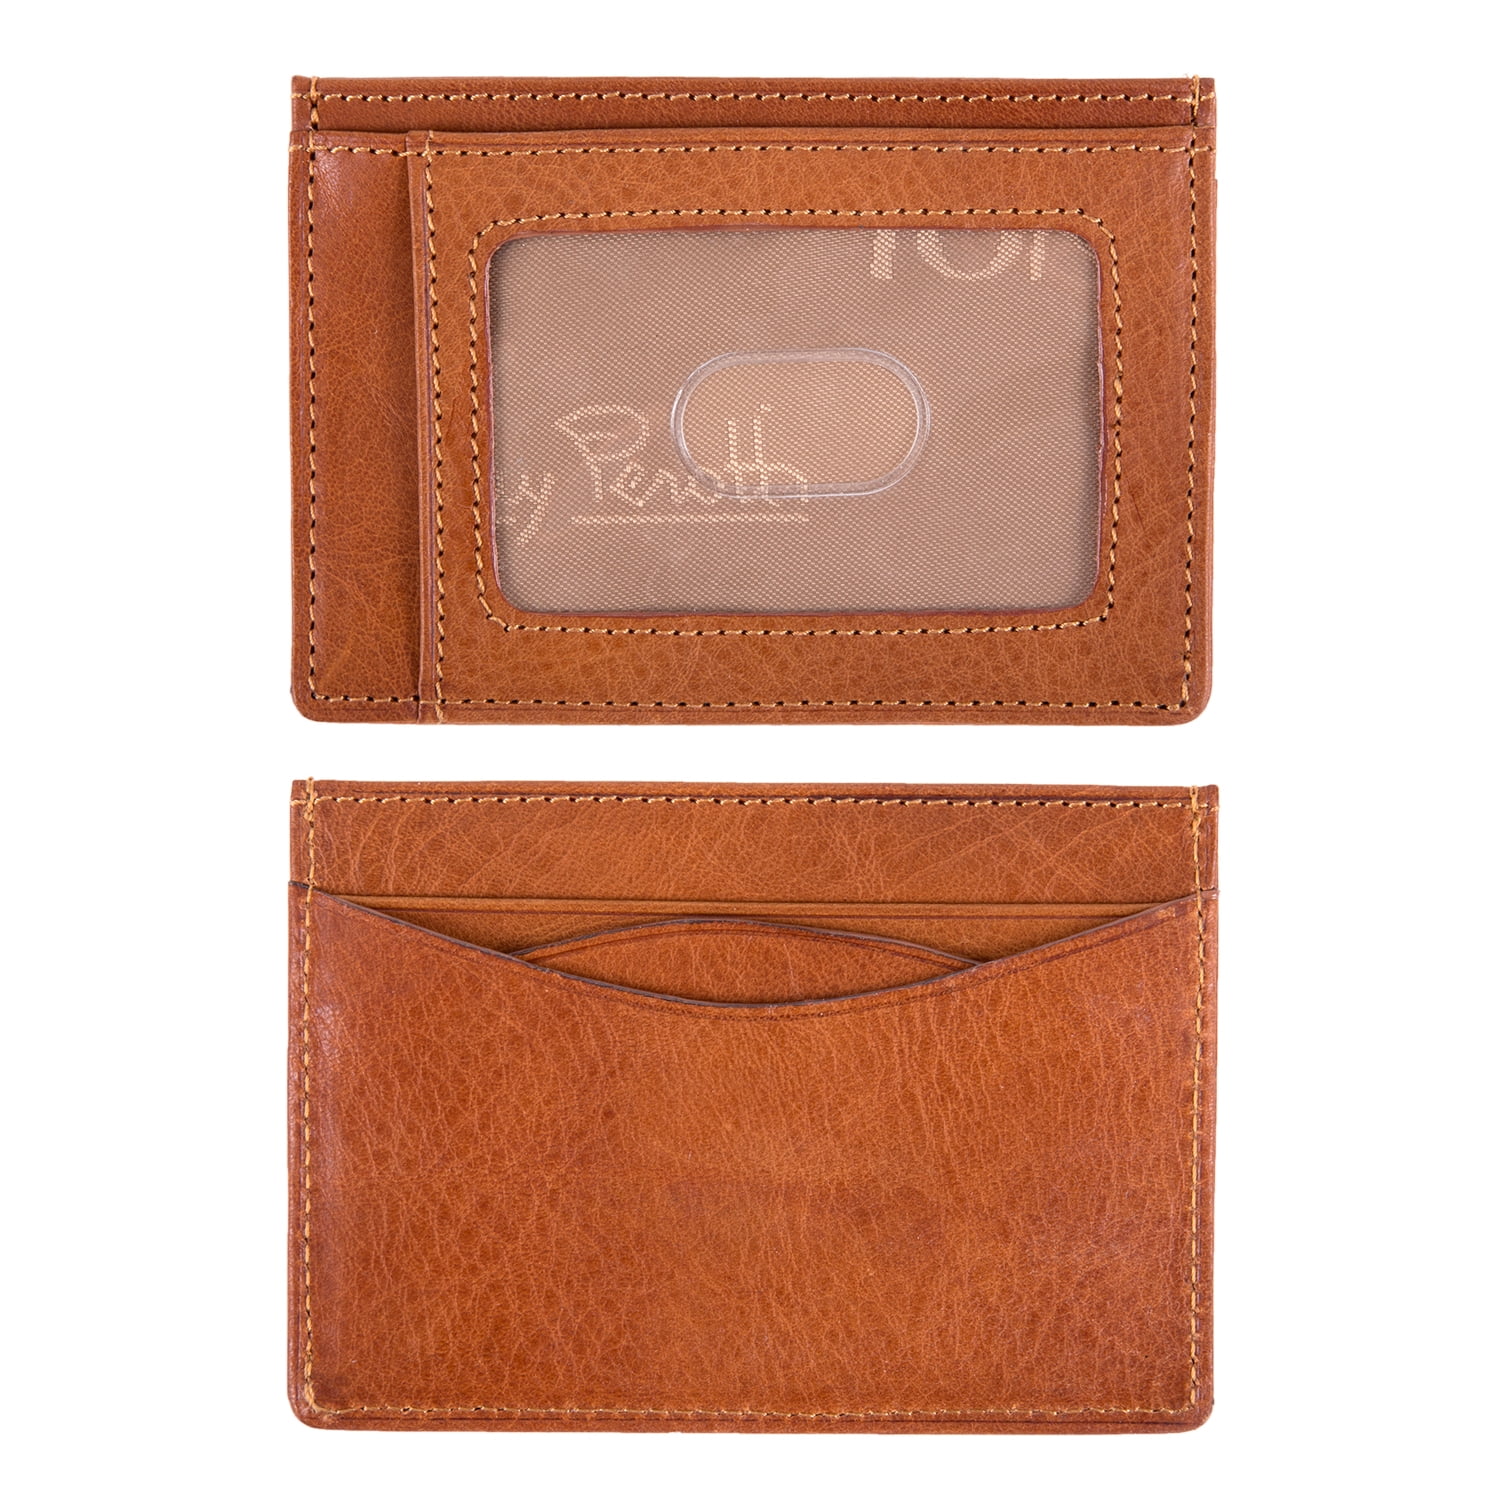 Tony Perotti Italian Leather Slim Front Pocket Weekend Wallet with 